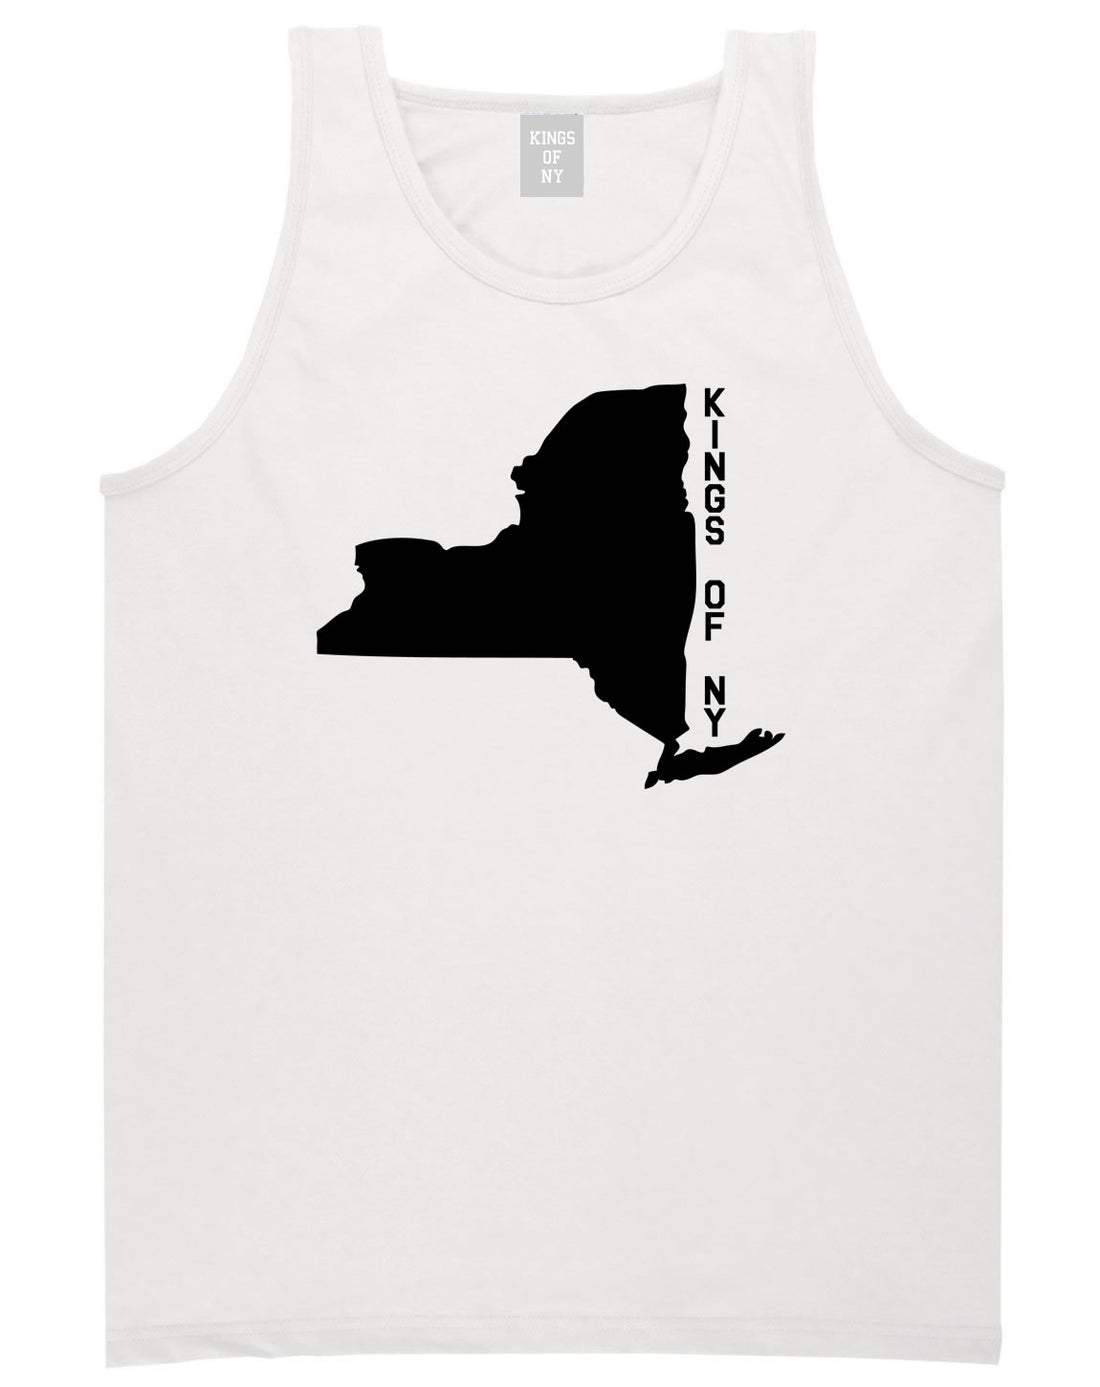 New York State Shape Tank Top in White By Kings Of NY